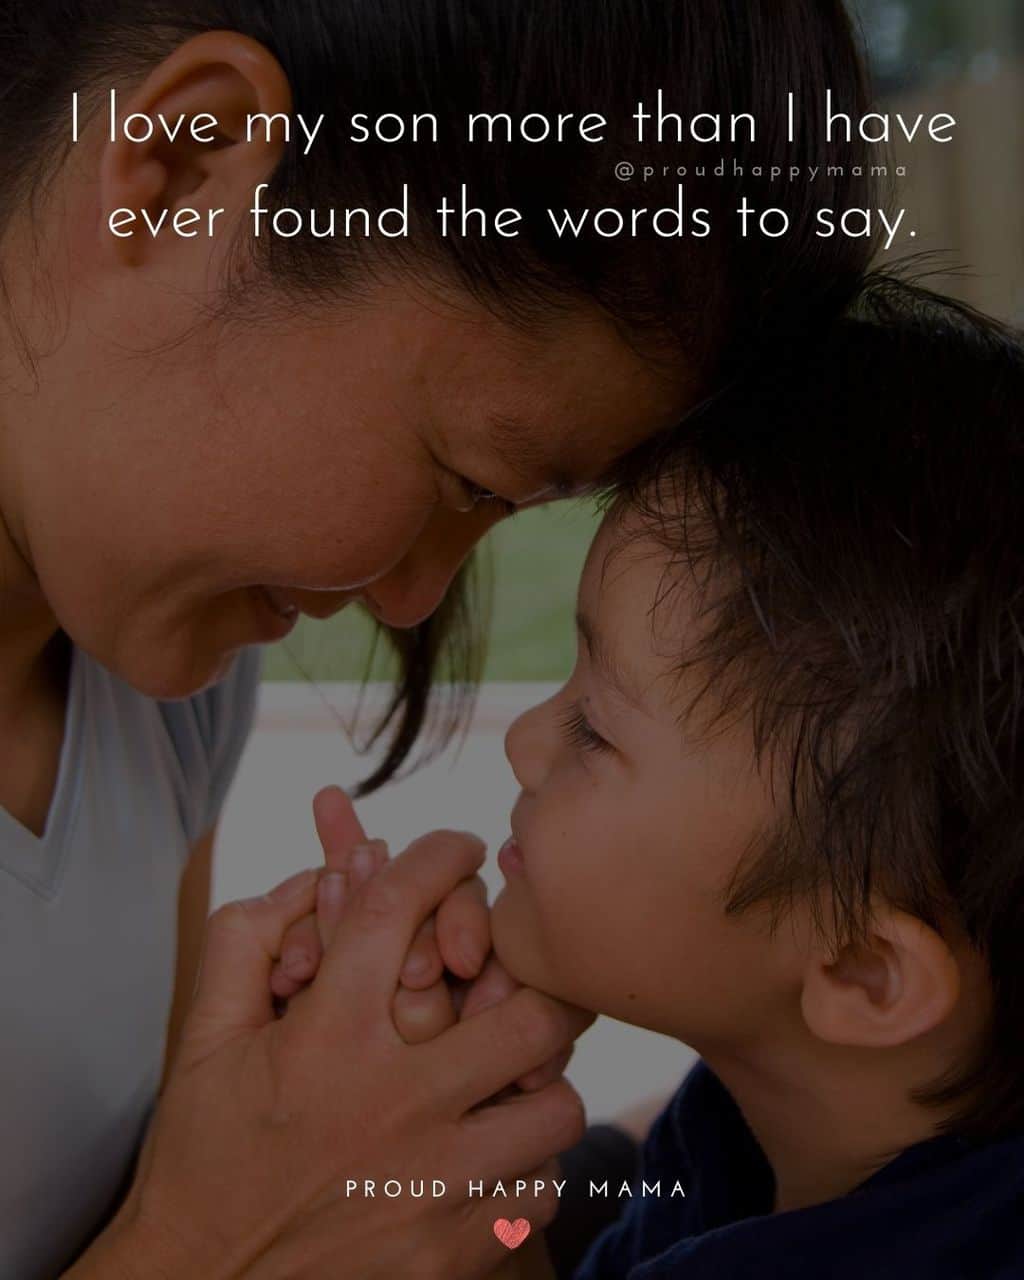 Son Quotes - I love my son more than I have ever found the words to say.’